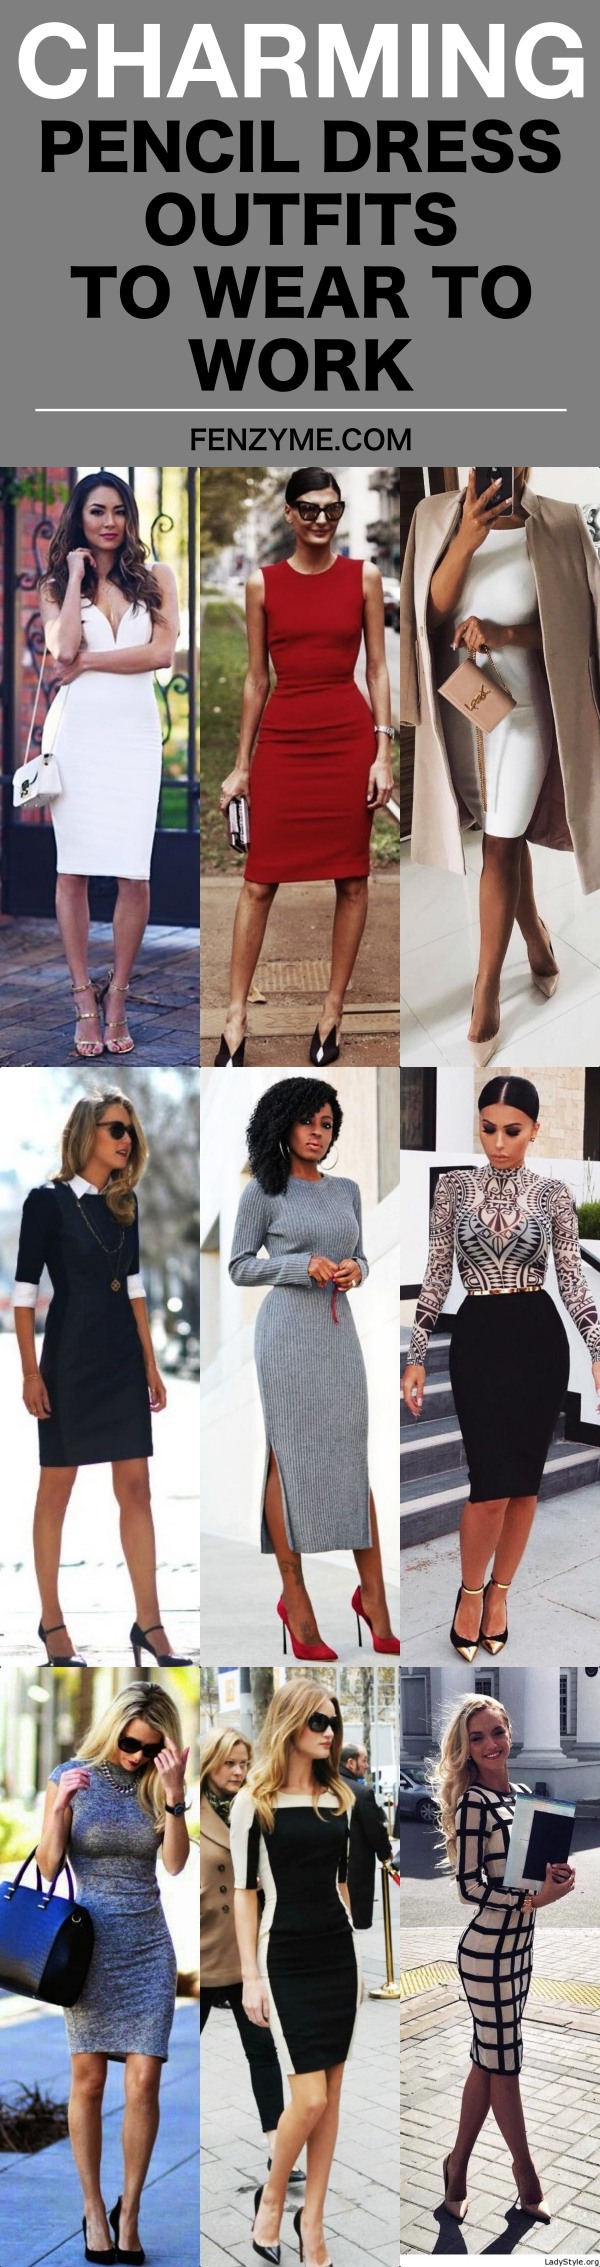 Pencil Dress Outfits To Wear To Work